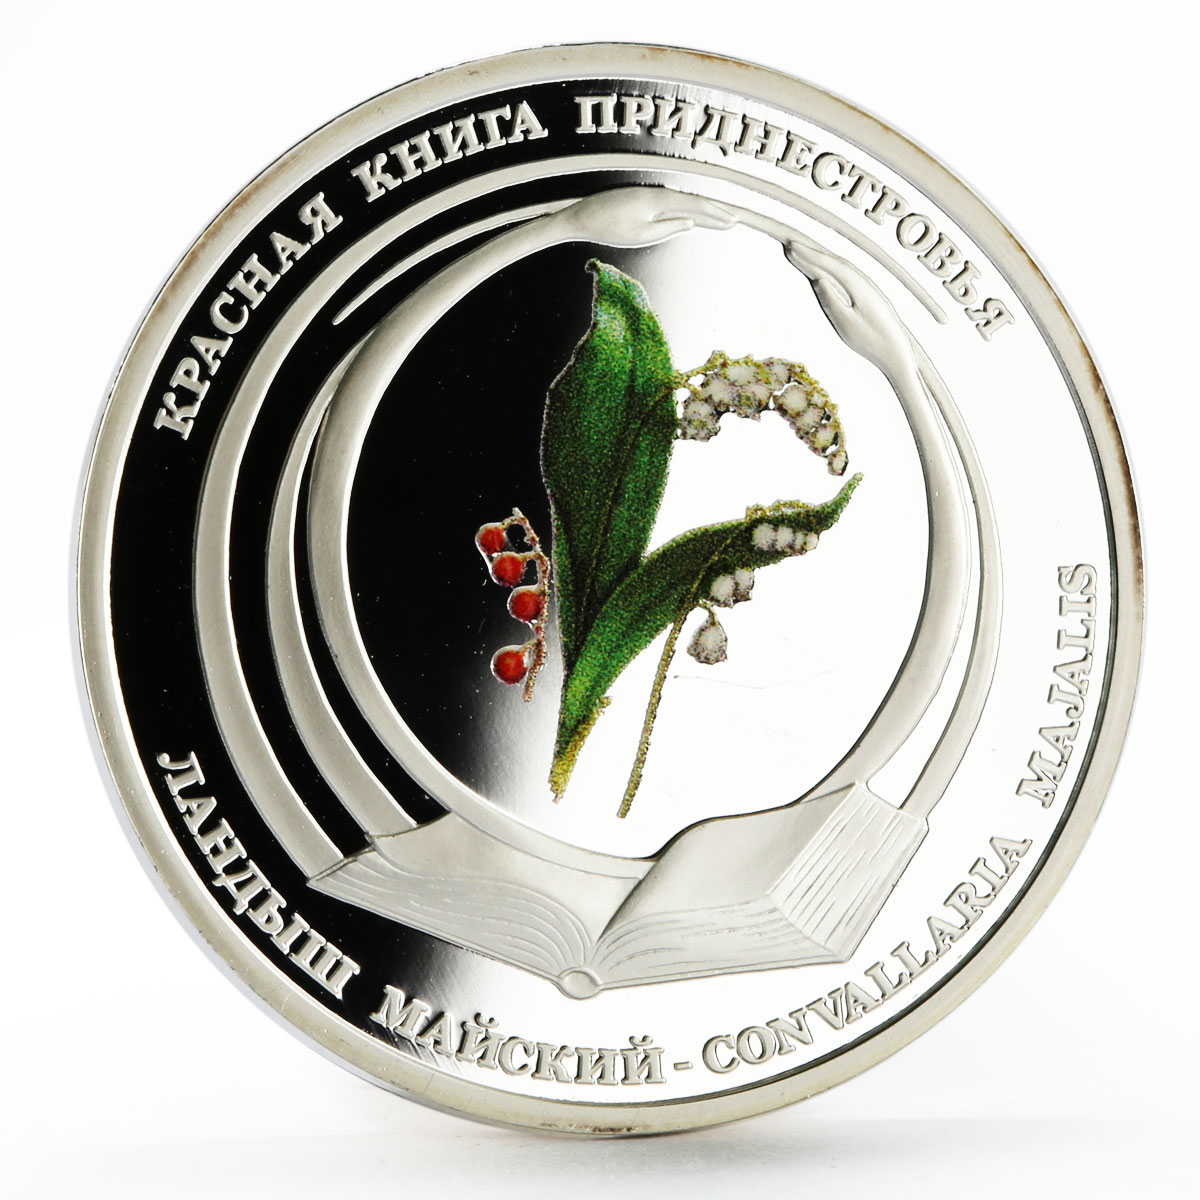 Transnistria 10 rubles Local Red Book series Lily of the Valley silver coin 2017